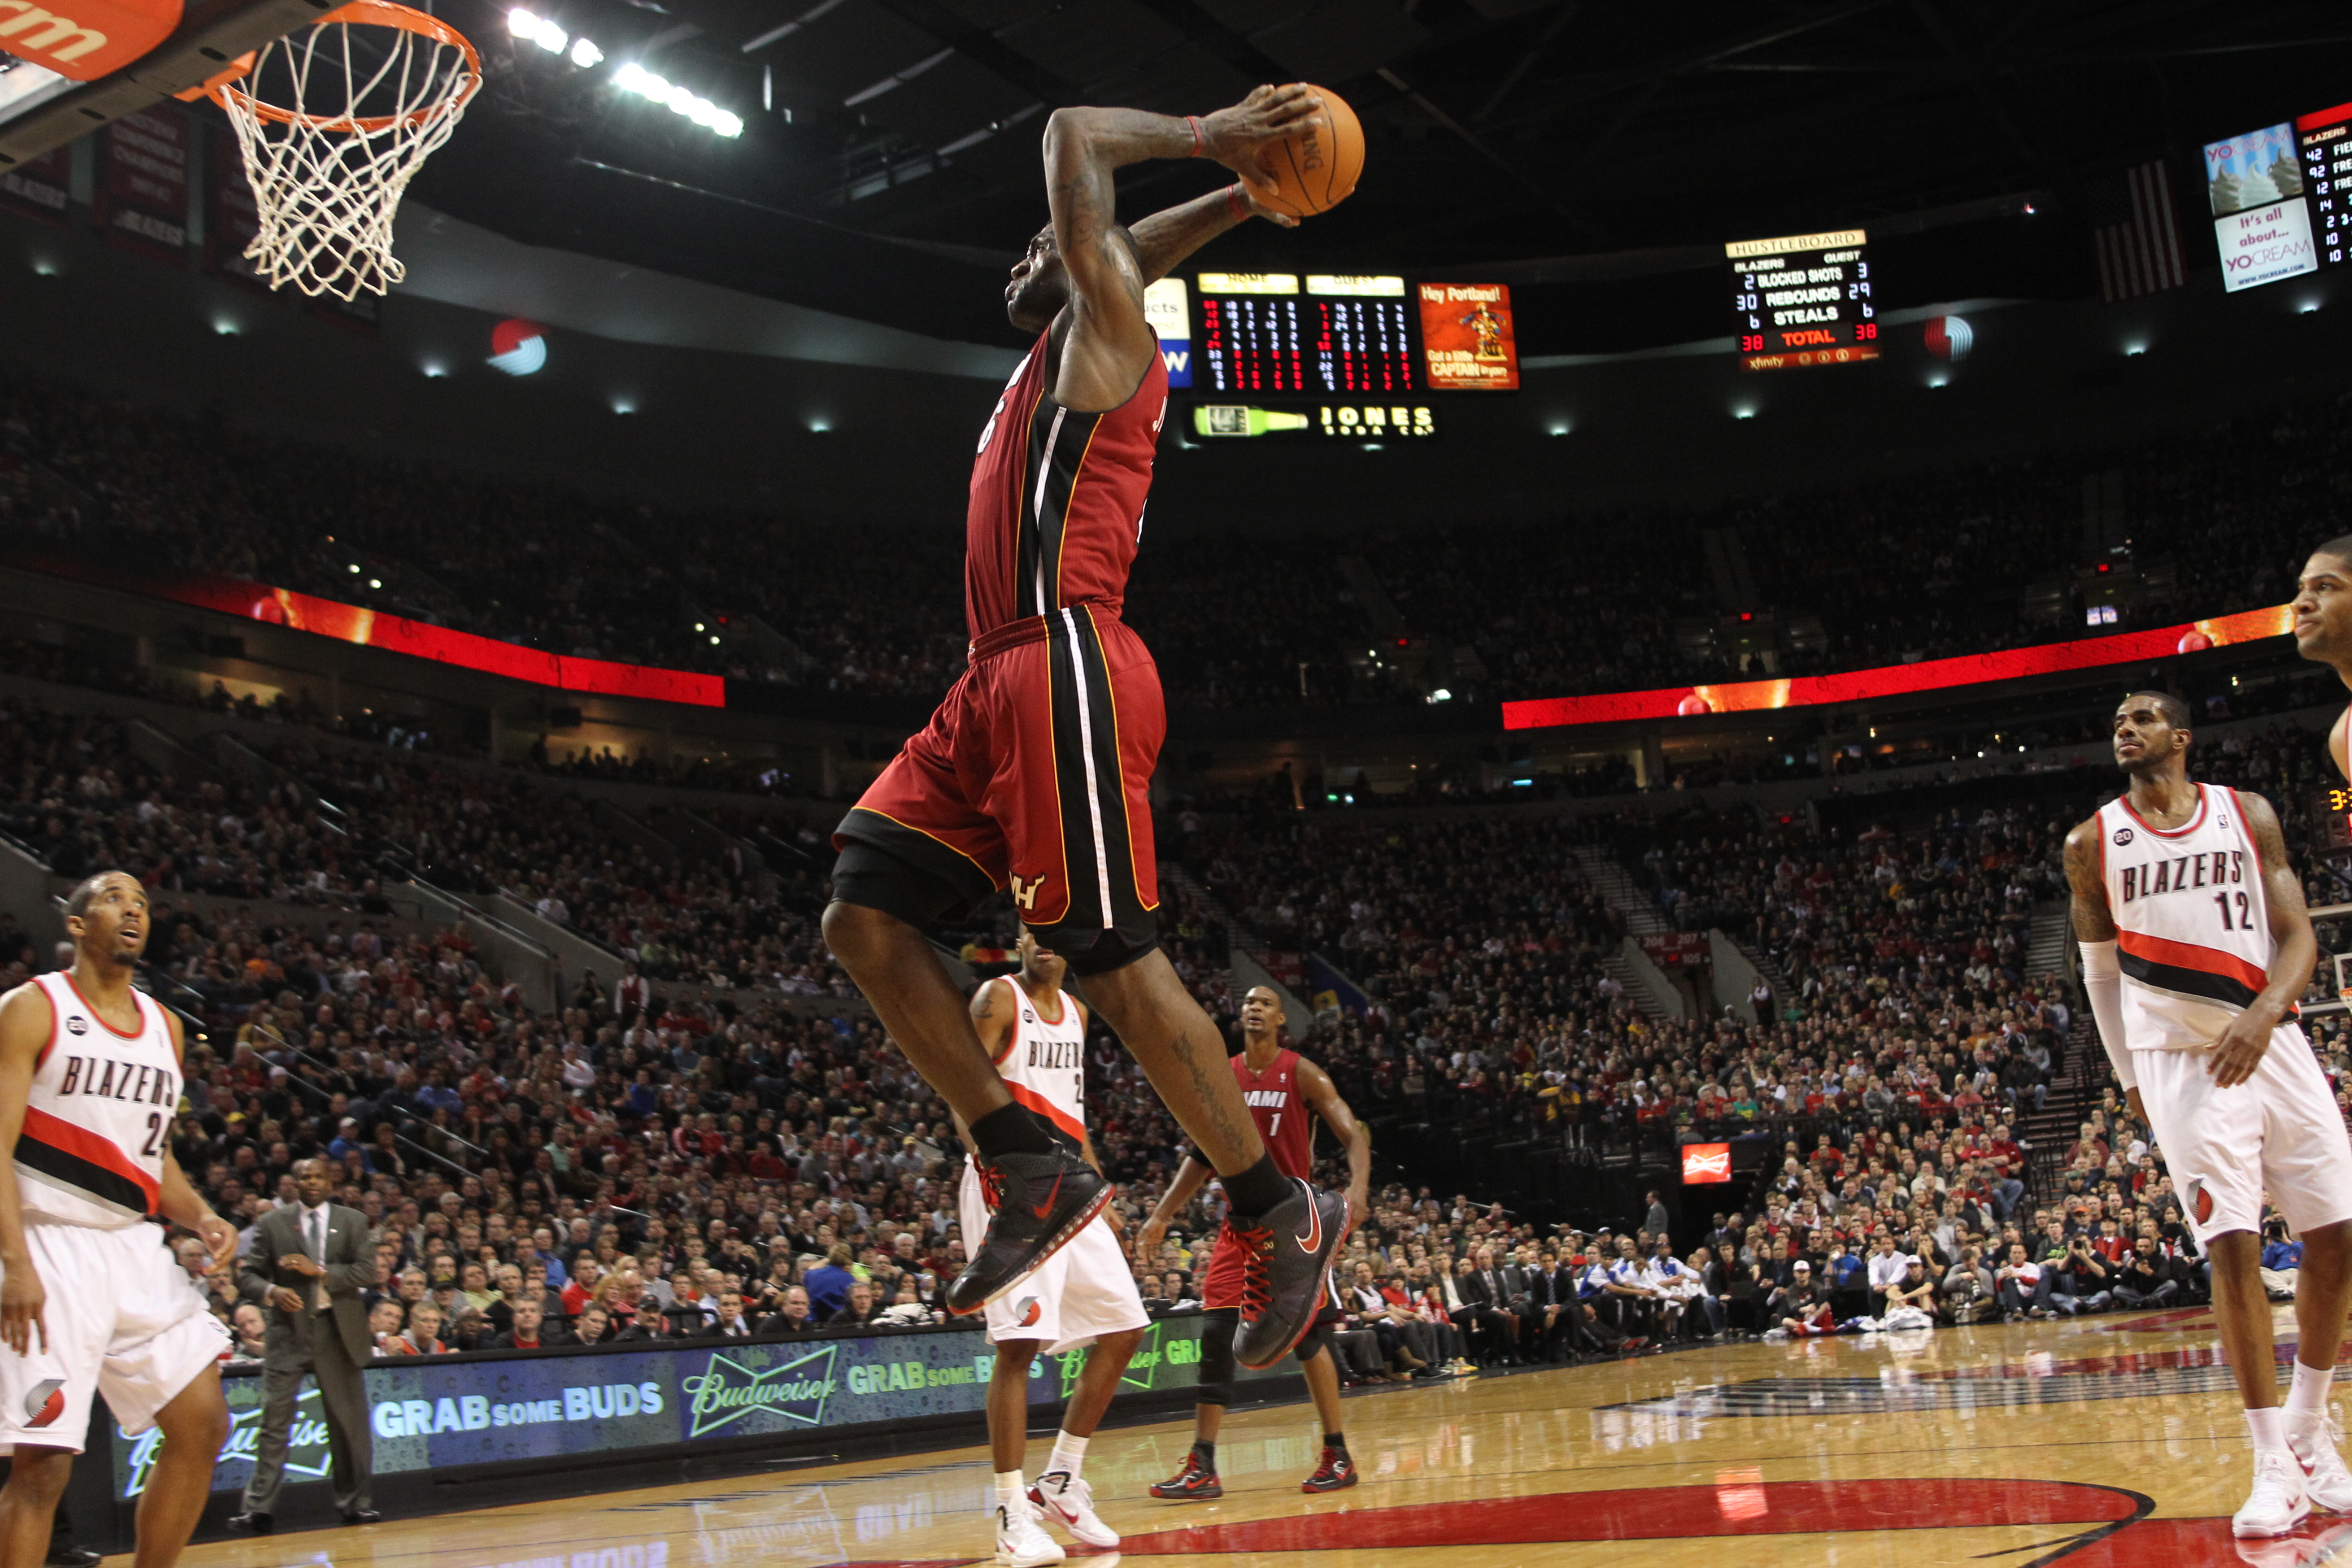 PORTLAND, OR - JANUARY 09: LeBron James #6 of the Miami Heat dunks against the Portland Trail Blazers during a game on January 9, 2011 at the Rose Garden Arena in Portland, Oregon. NOTE TO USER: User expressly acknowledges and agrees that, by downloading